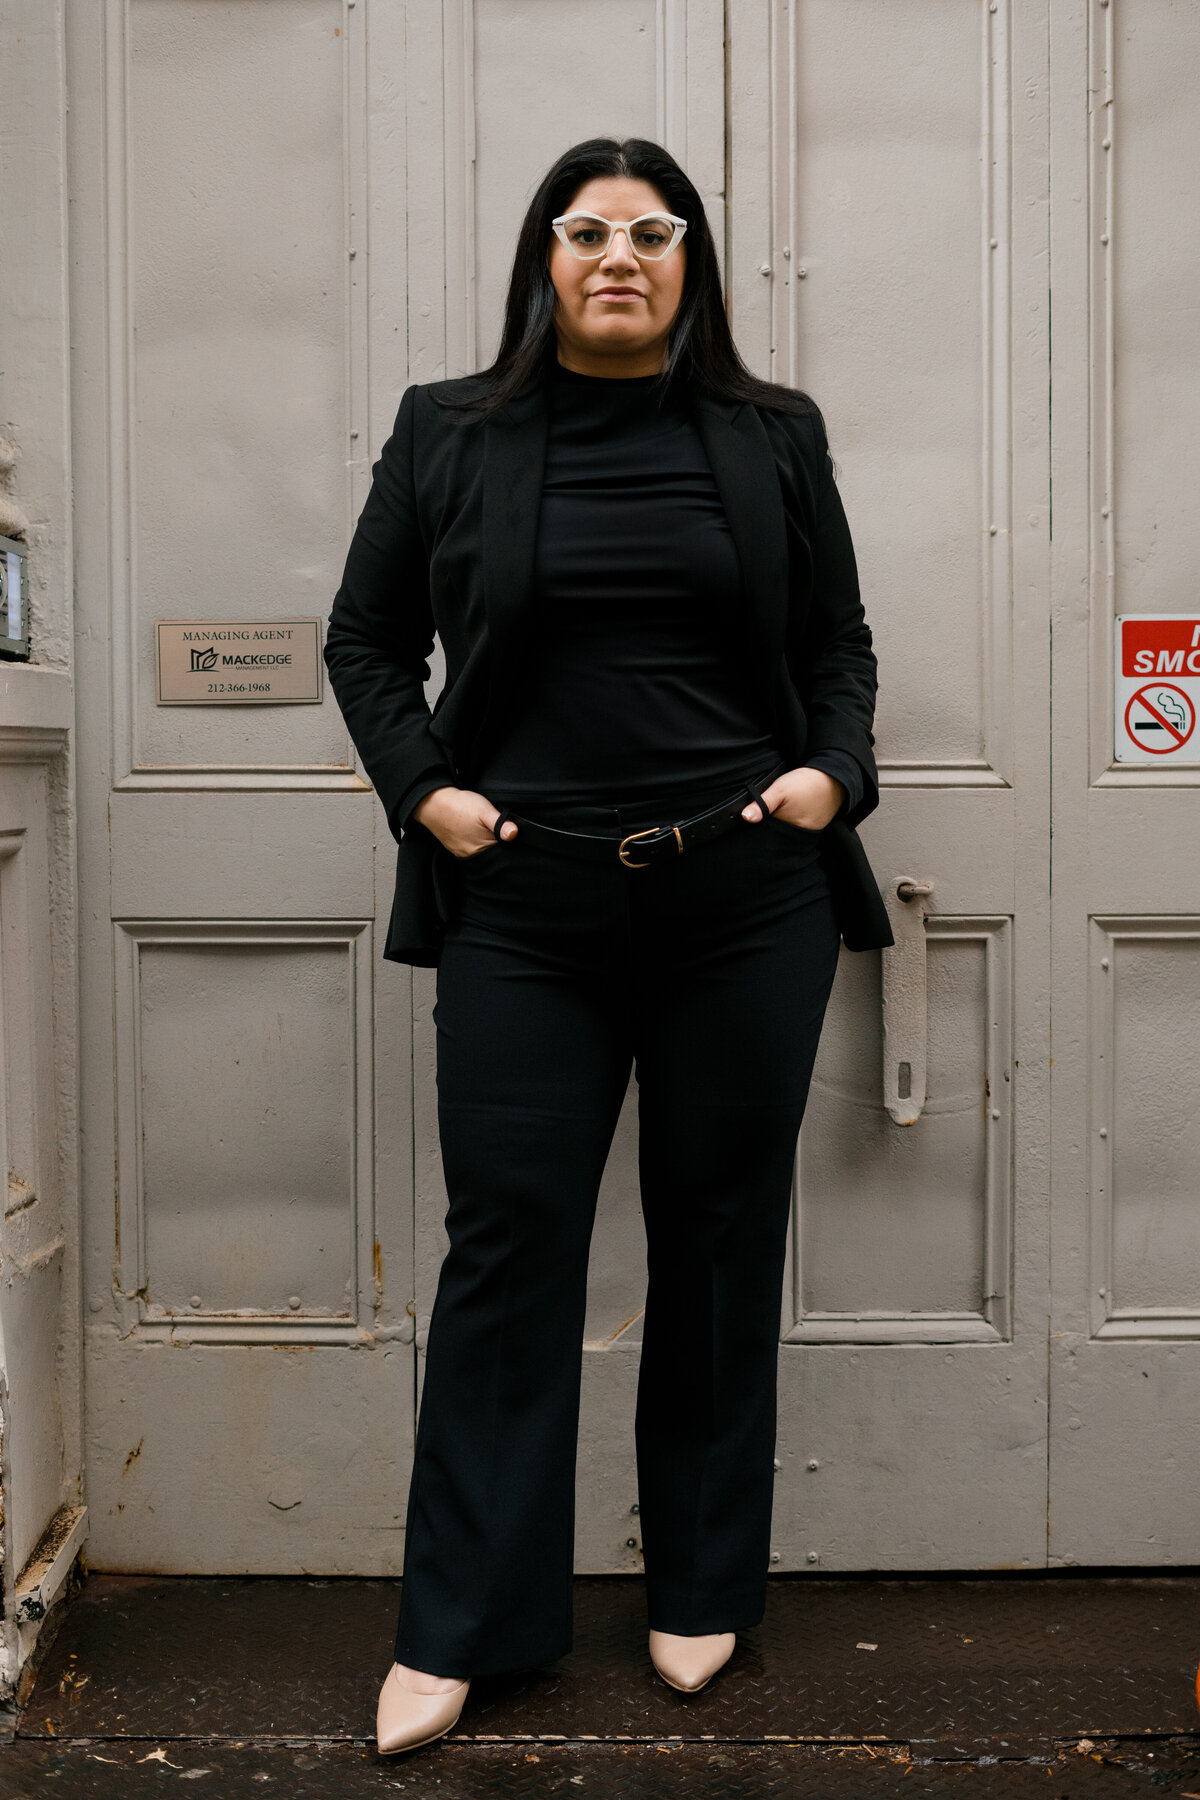 woman in a power stance with white glasses